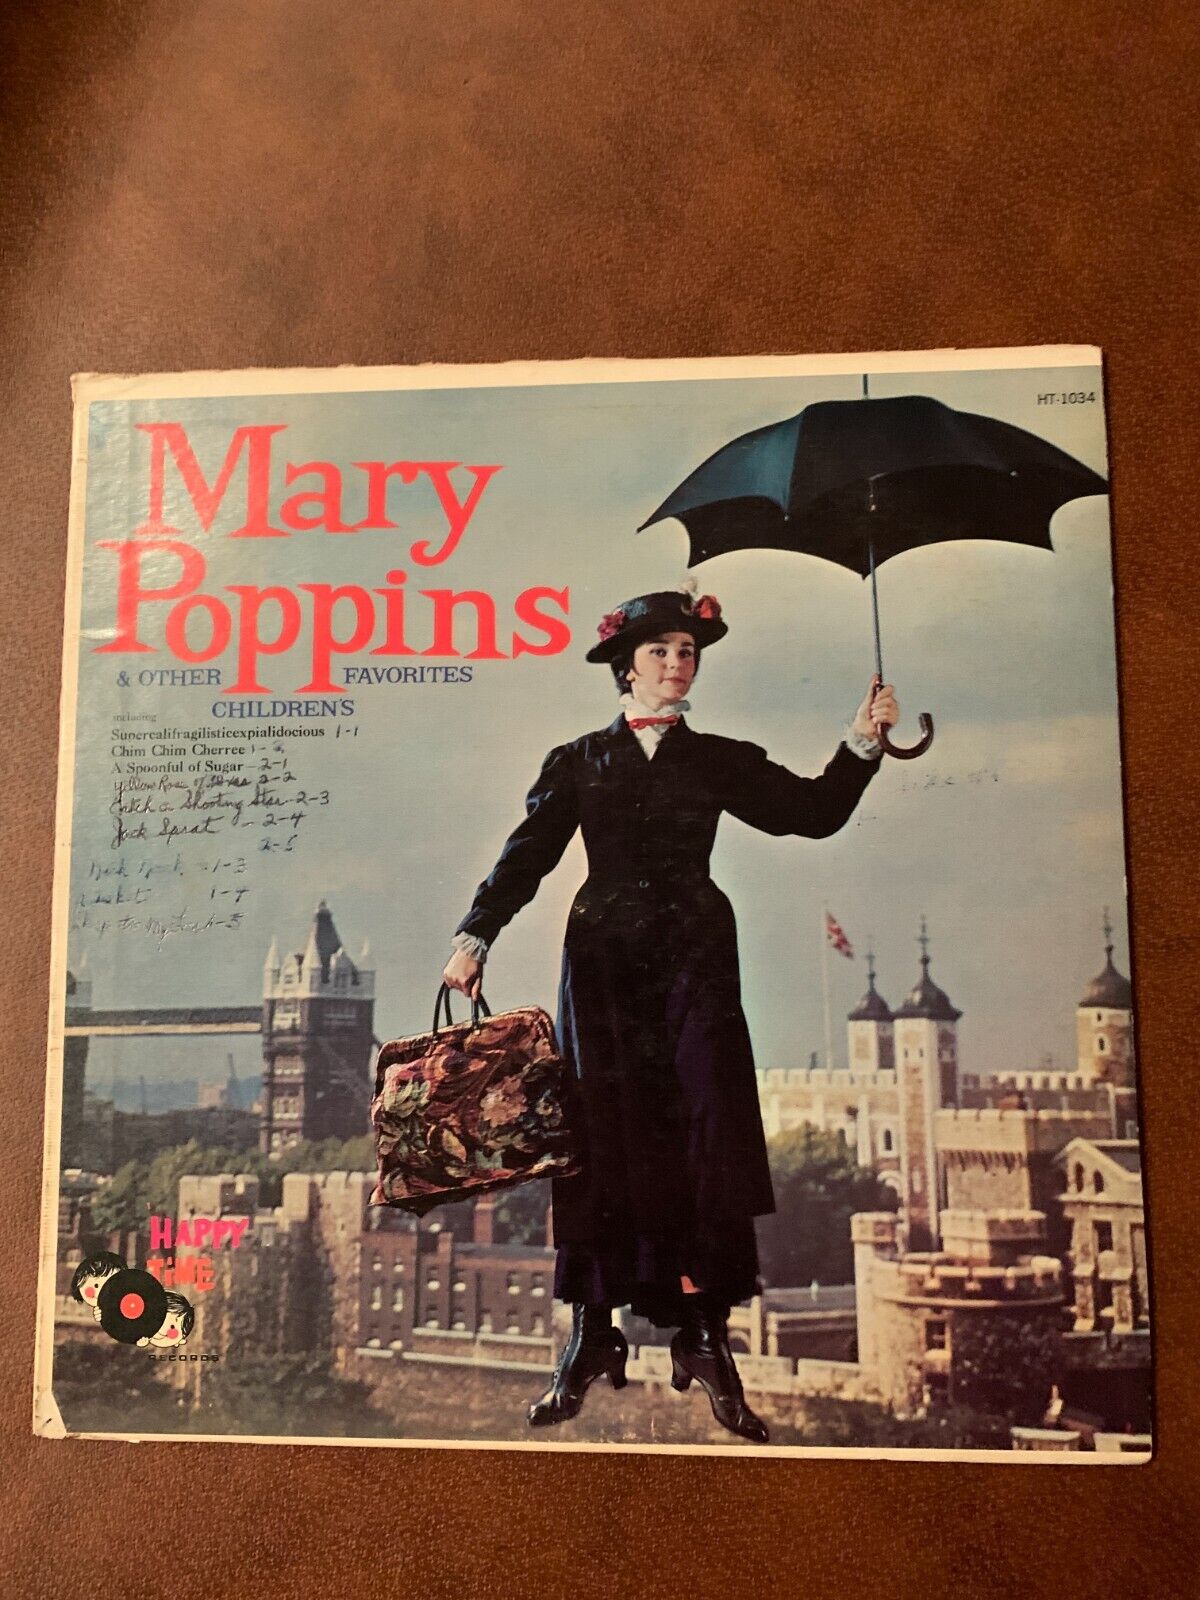 Mary Poppins And Other Children\'s Favorites 1965 HT-1034 Vinyl 12\'\' Vintage